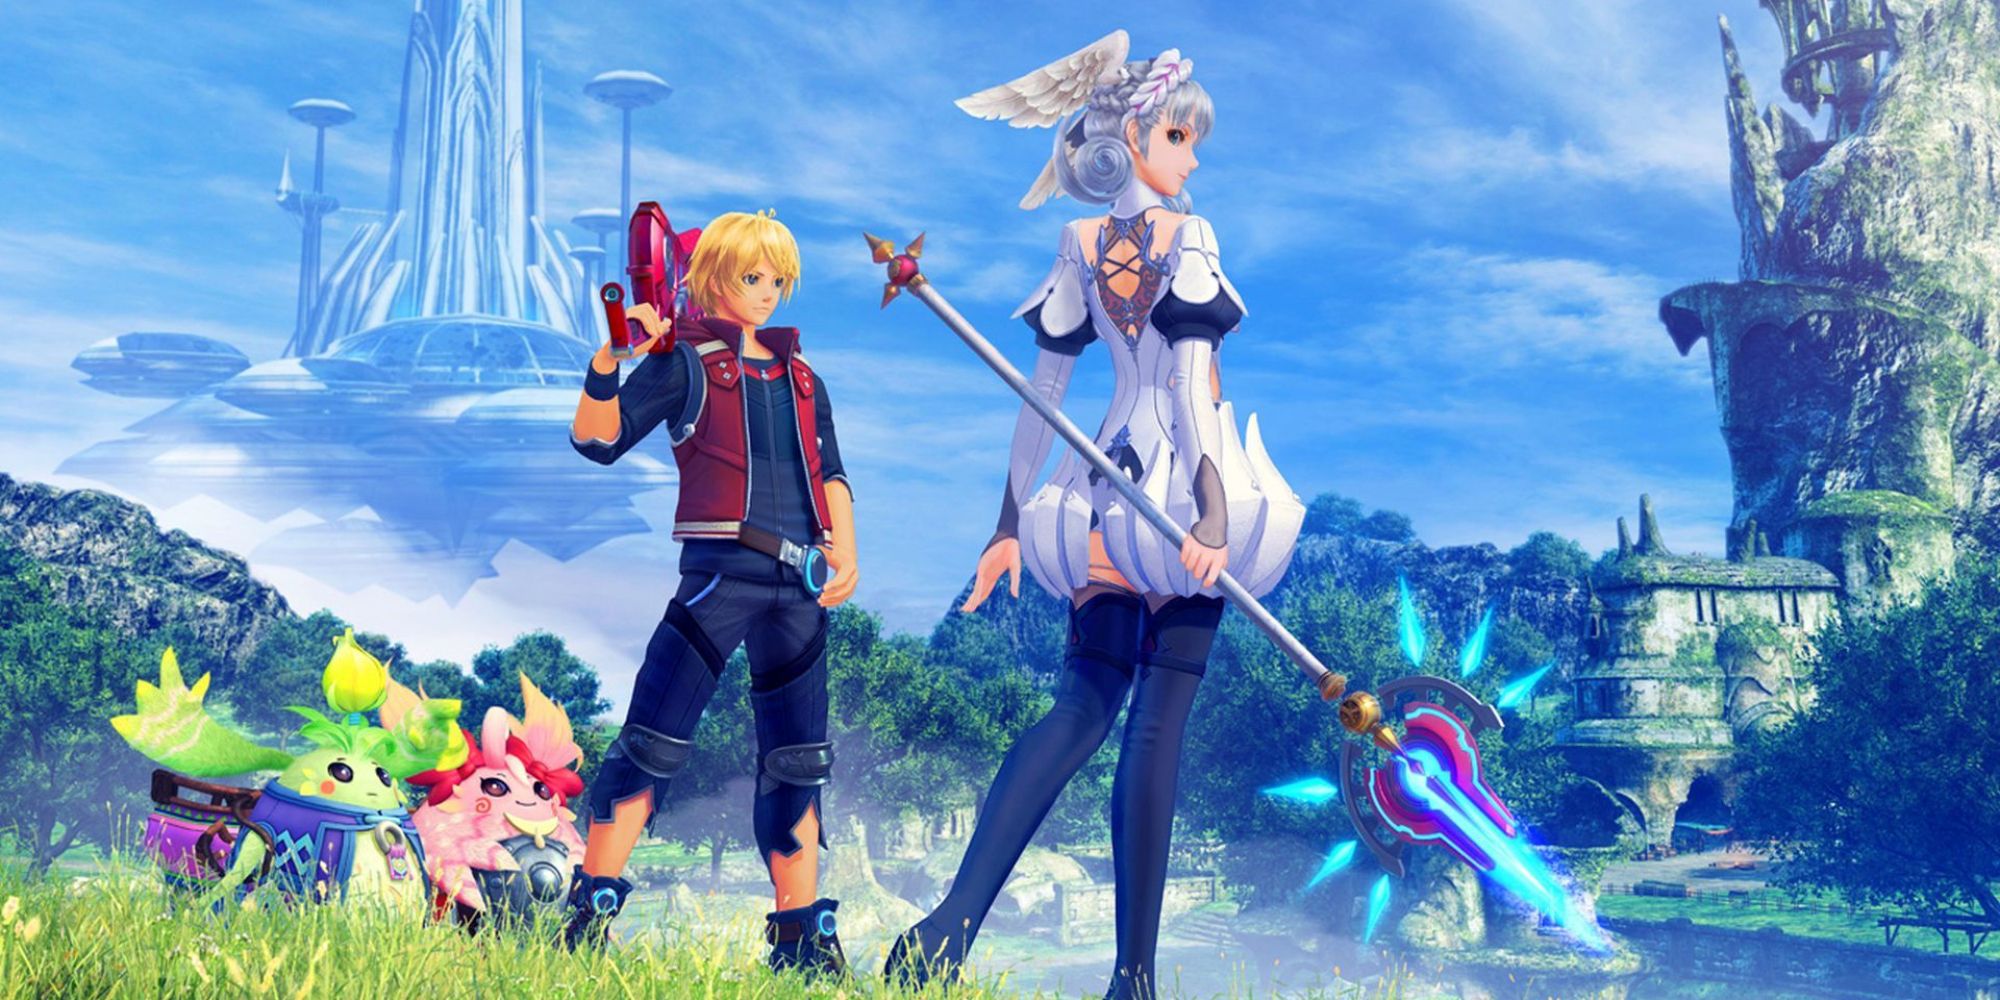 Promotional image for Xenoblade Chronicles: Definitive Edition - Future Connected DLC featuring Shulk, Melia, Nene and Kino from the game 